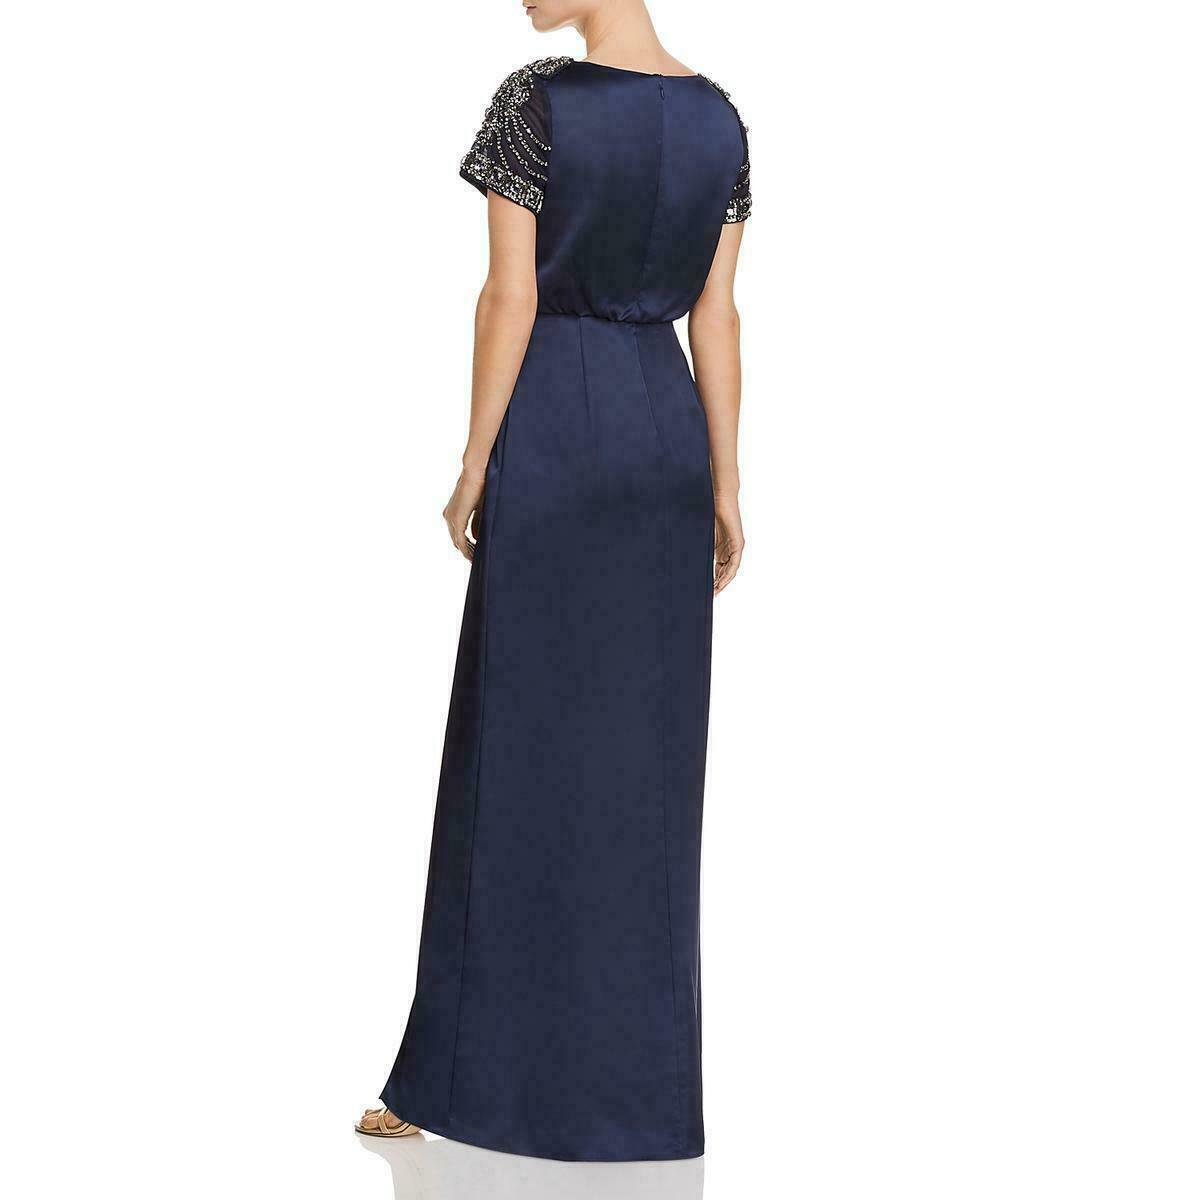 Aidan Mattox Womens Navy Embellished Faux Wrap Evening Dress Gown Size 0 - SVNYFancy